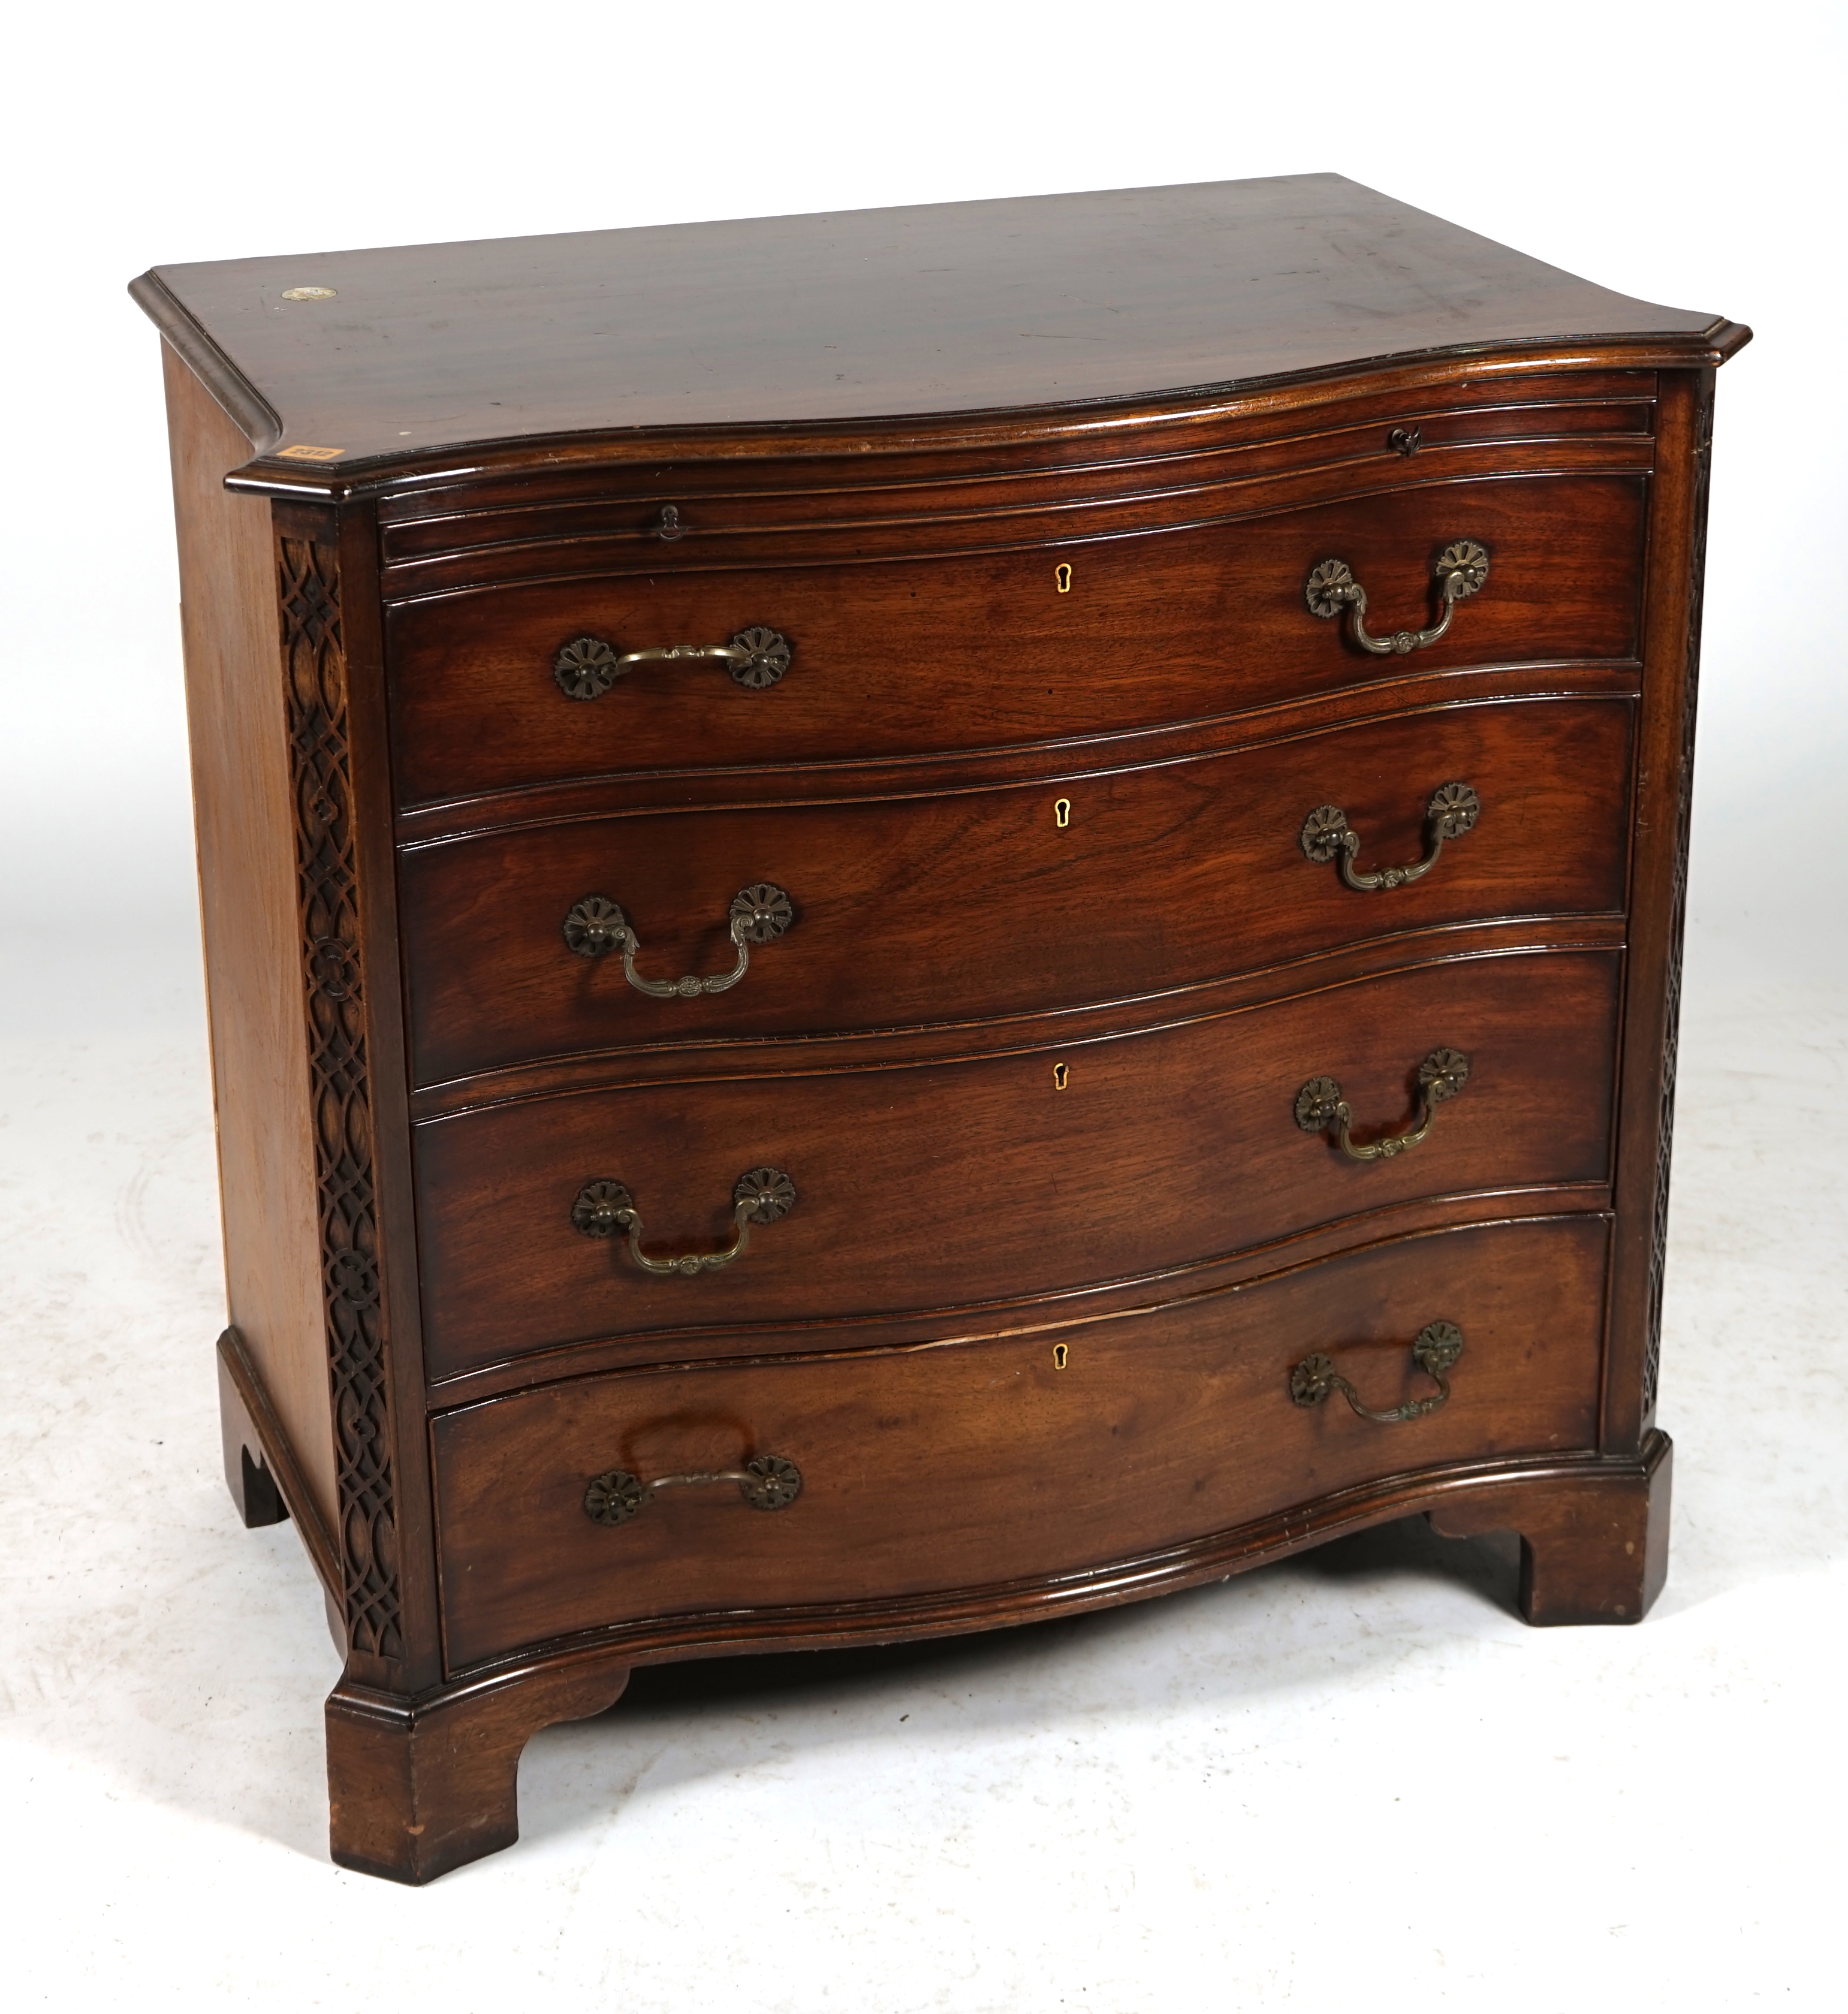 A GEORGE III STYLE MAHOGANY SERPENTINE T.V CHEST